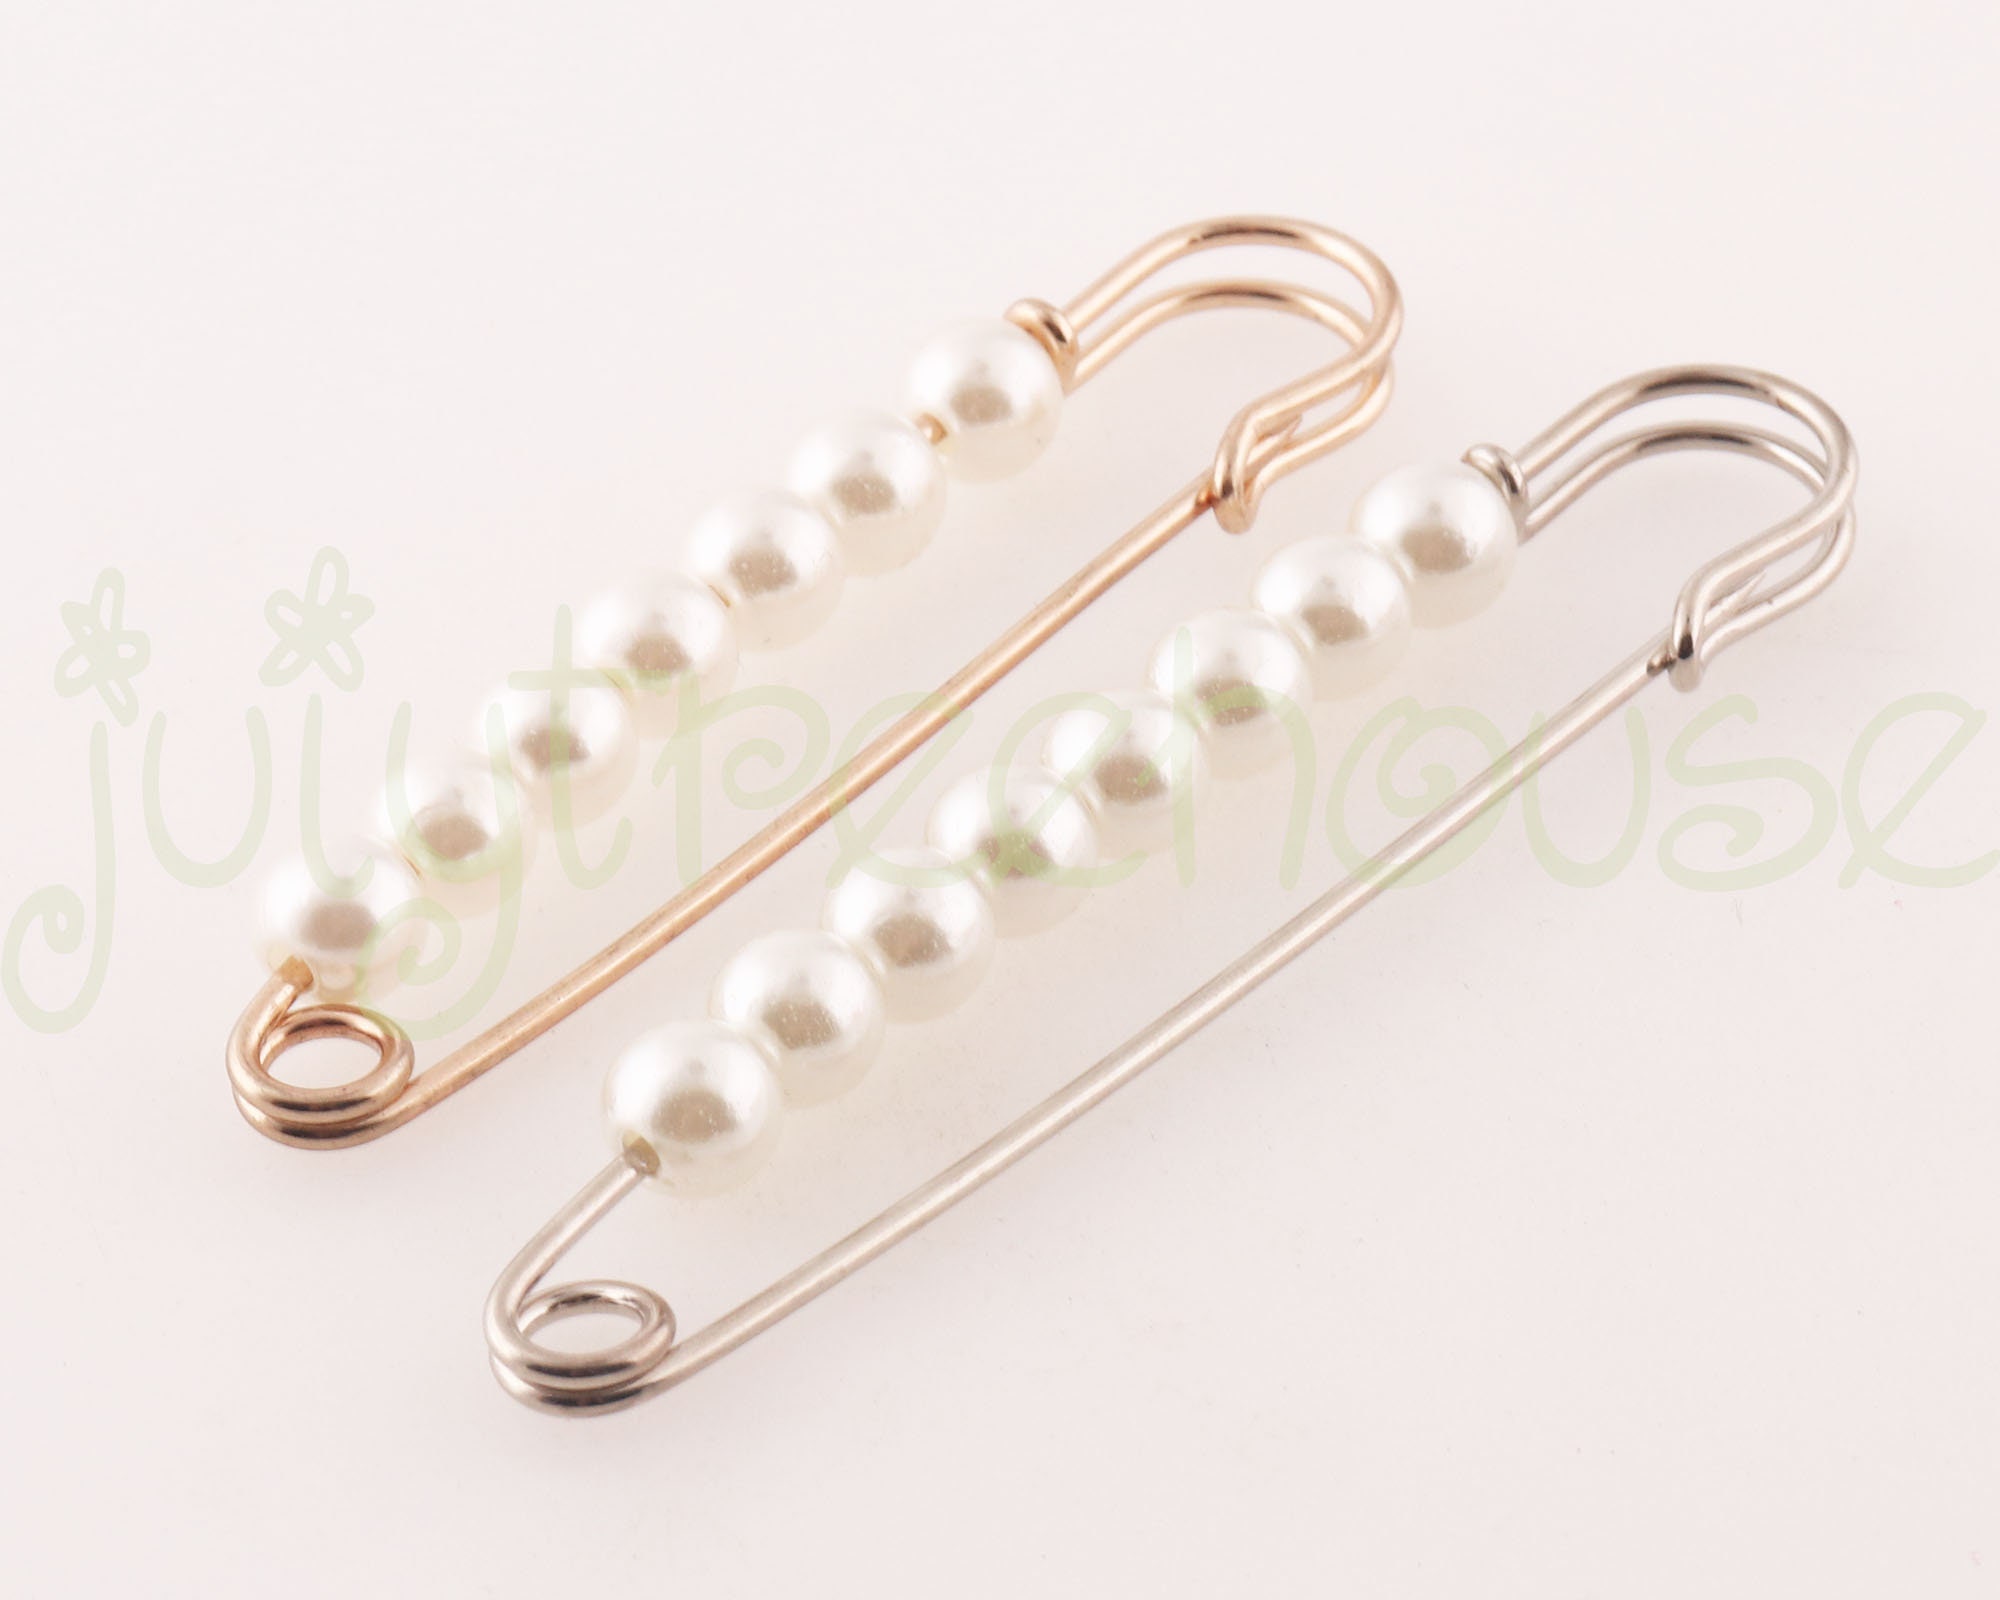 25-10pcs Safety Pins, 30mm-75mm Large Safety Pins For Clothes, Leather,  Canvas, Blankets, Handicrafts, Skirts, Extra Large Heavy Duty Safety Pins